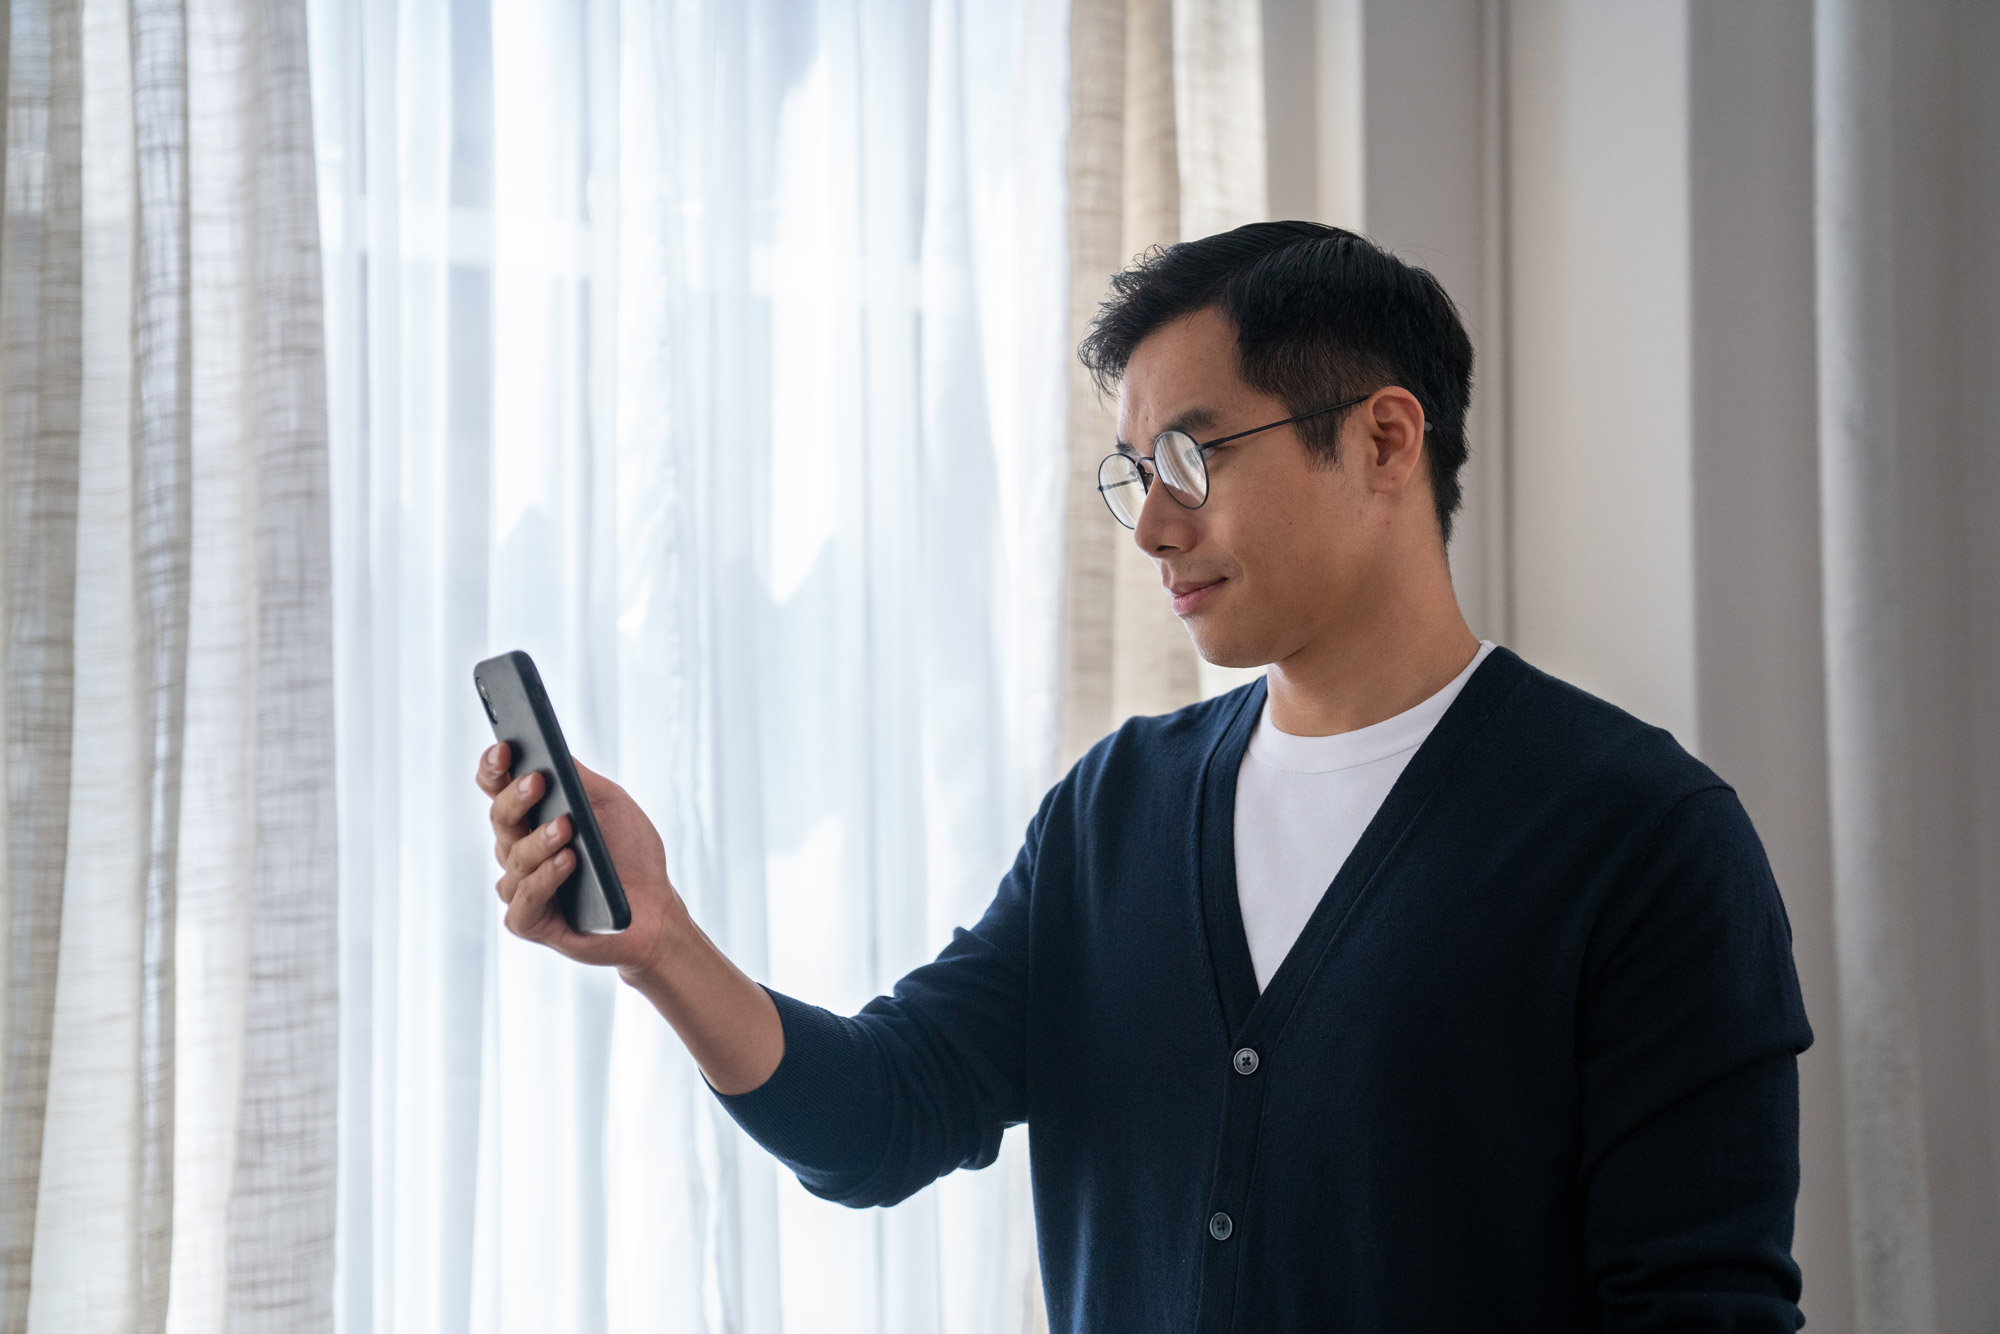 A man indoors holds up his cell phone and looks at the screen